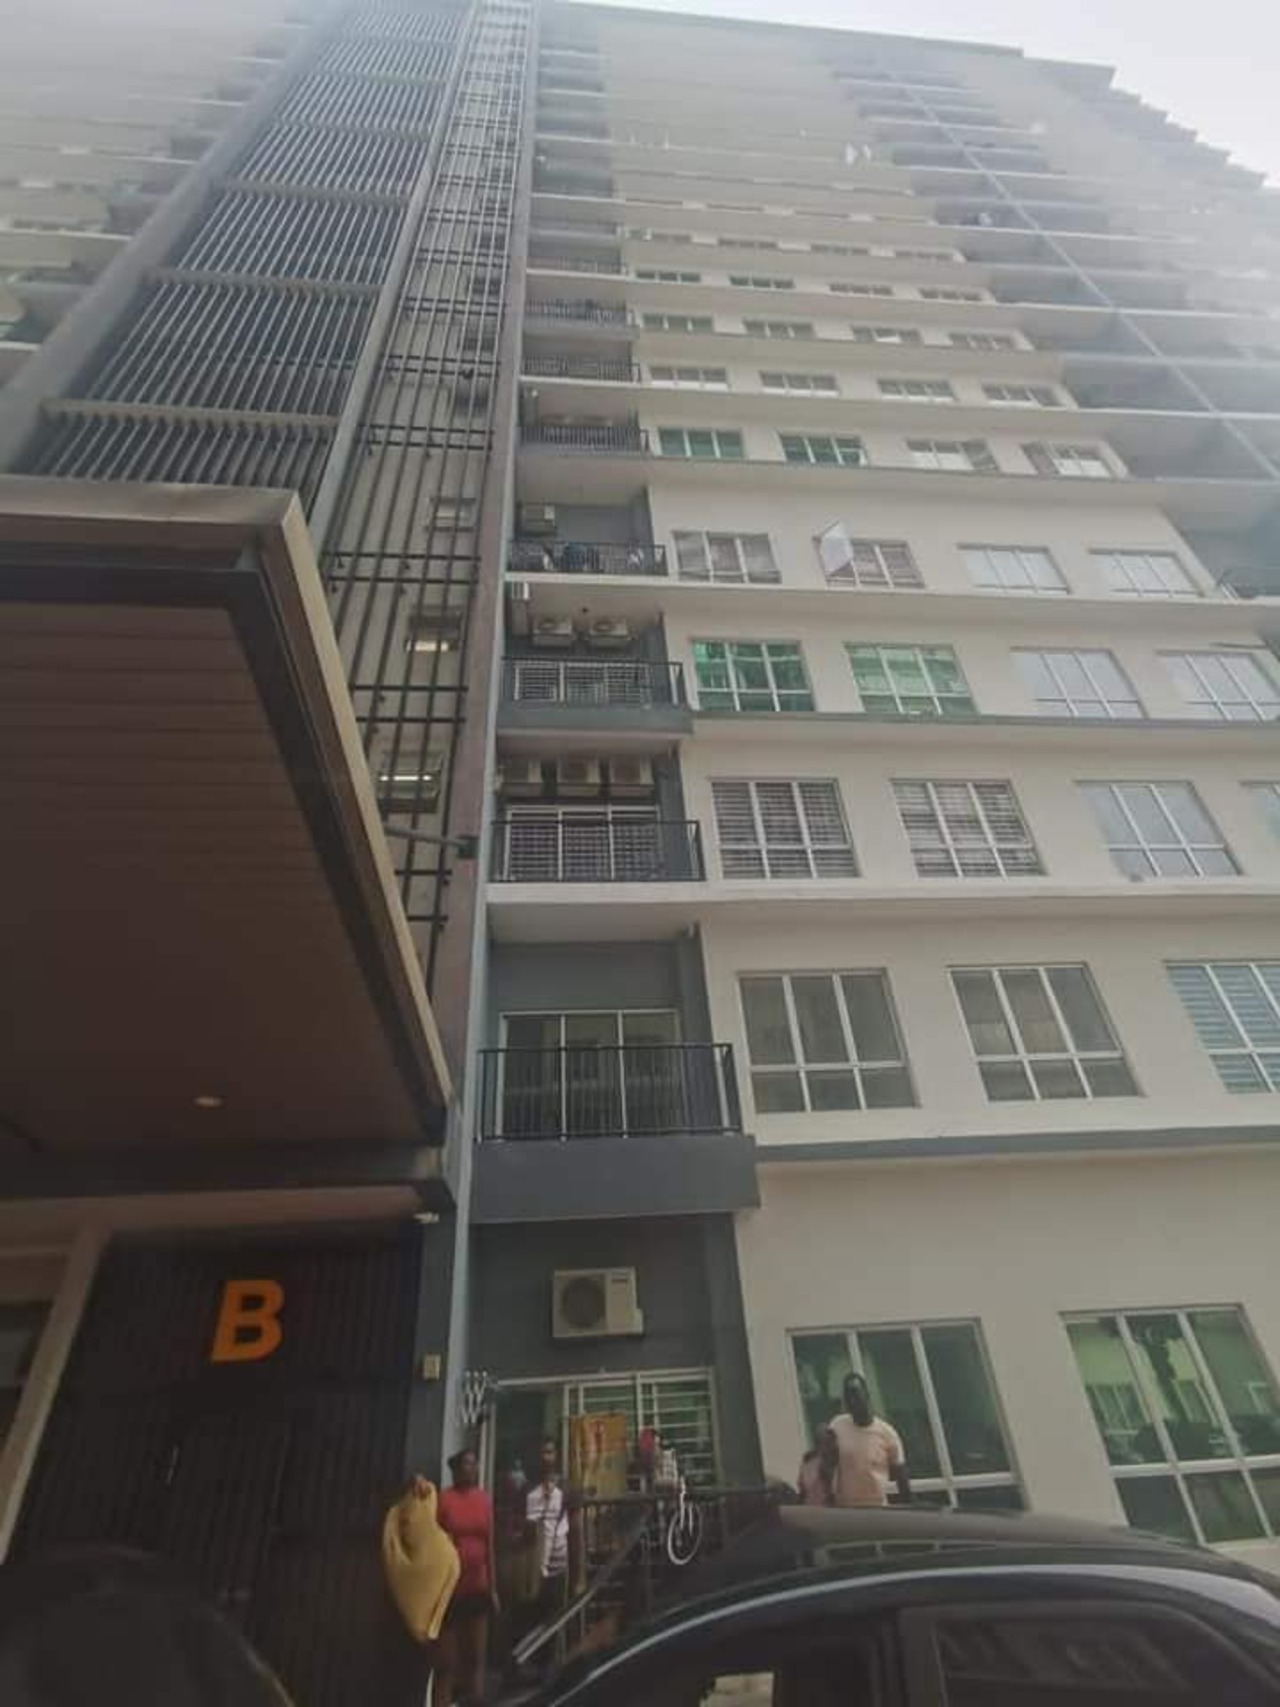 Zimbabwean Medical Student Jumps To His Death From Tall Building in Malaysia